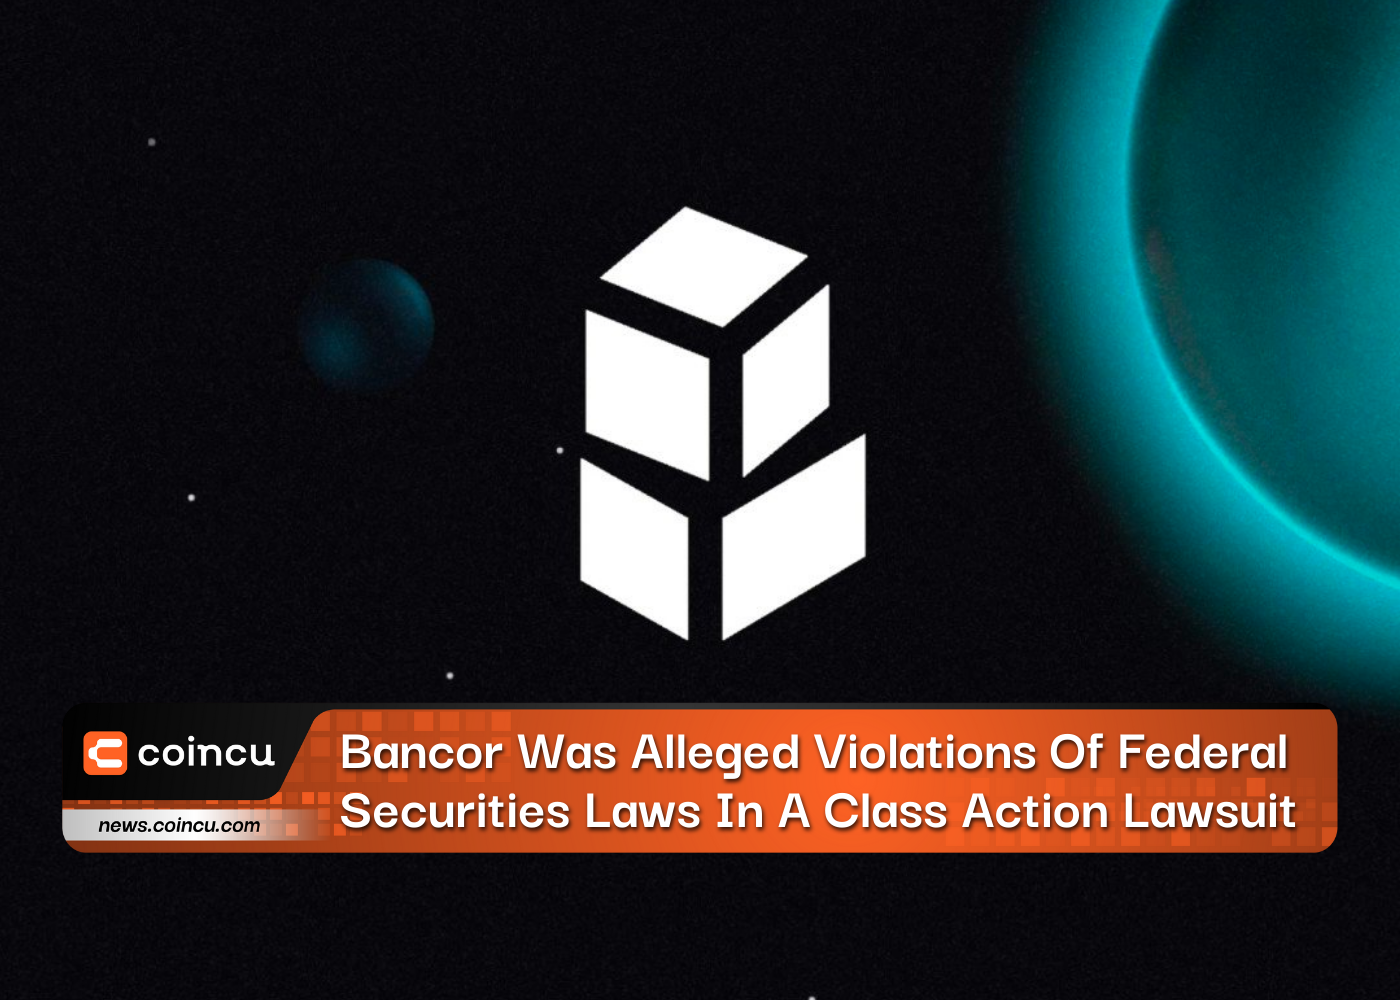 Bancor Was Alleged Violations Of Federal Securities Laws In A Class Action Lawsuit